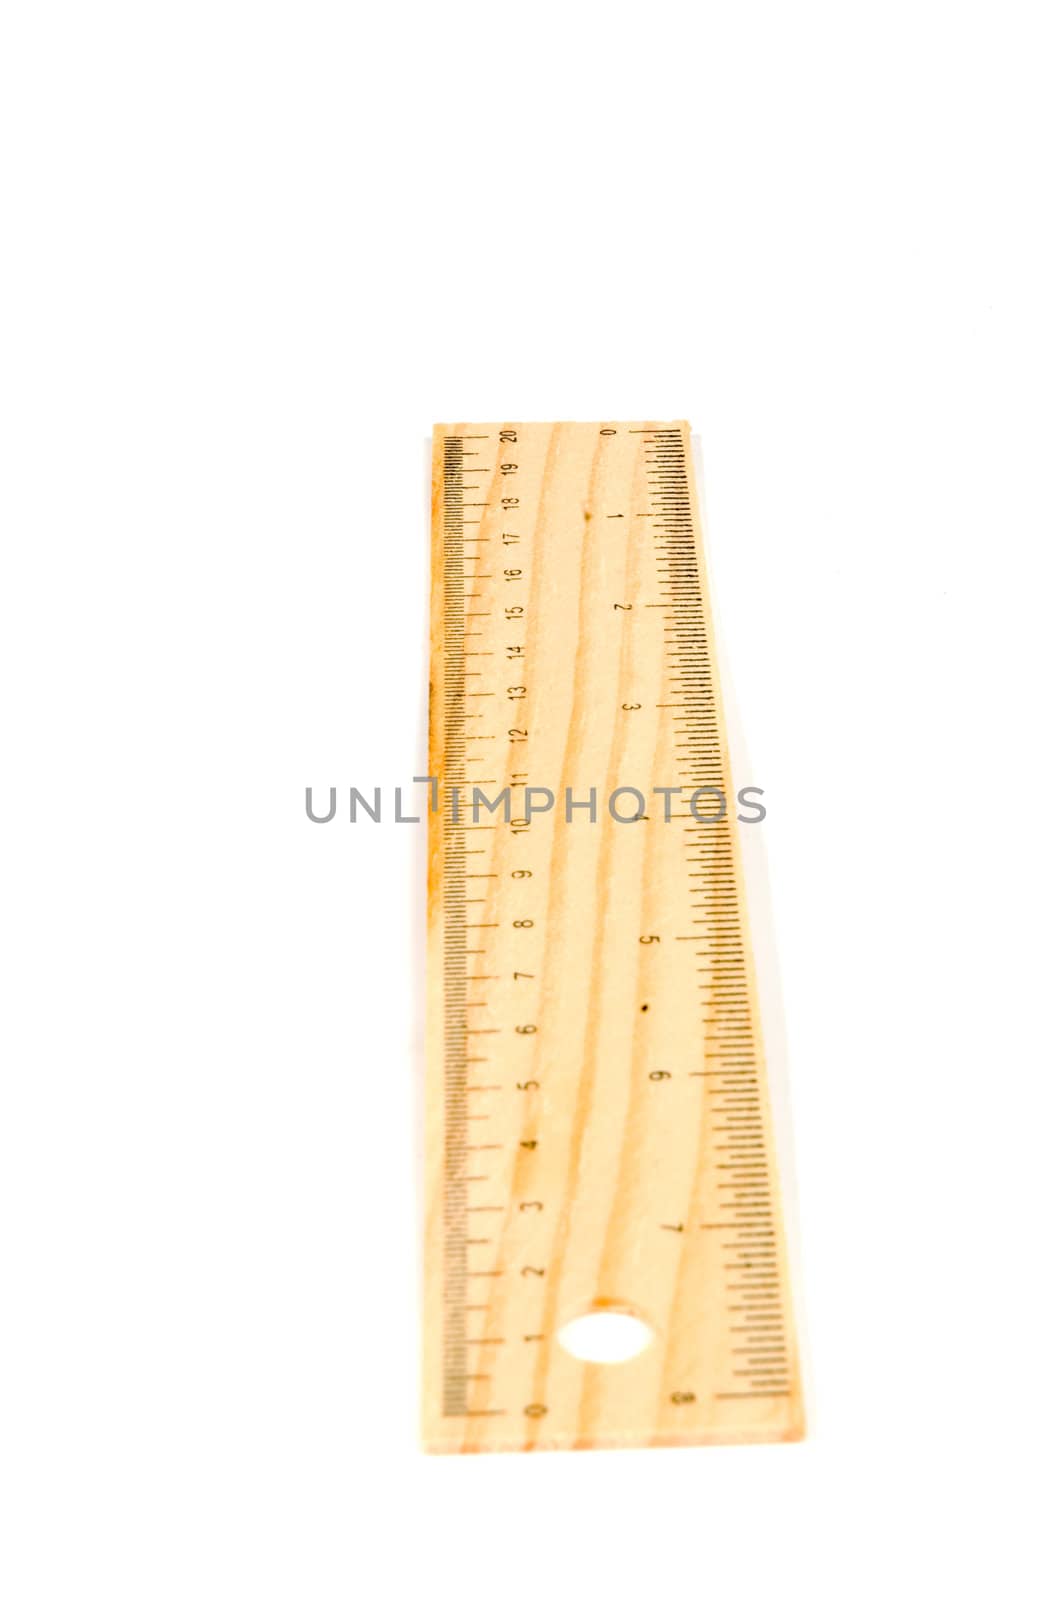 A 20 cm wooden ruler, isolated on a white background.Flip it ove by ladyminnie